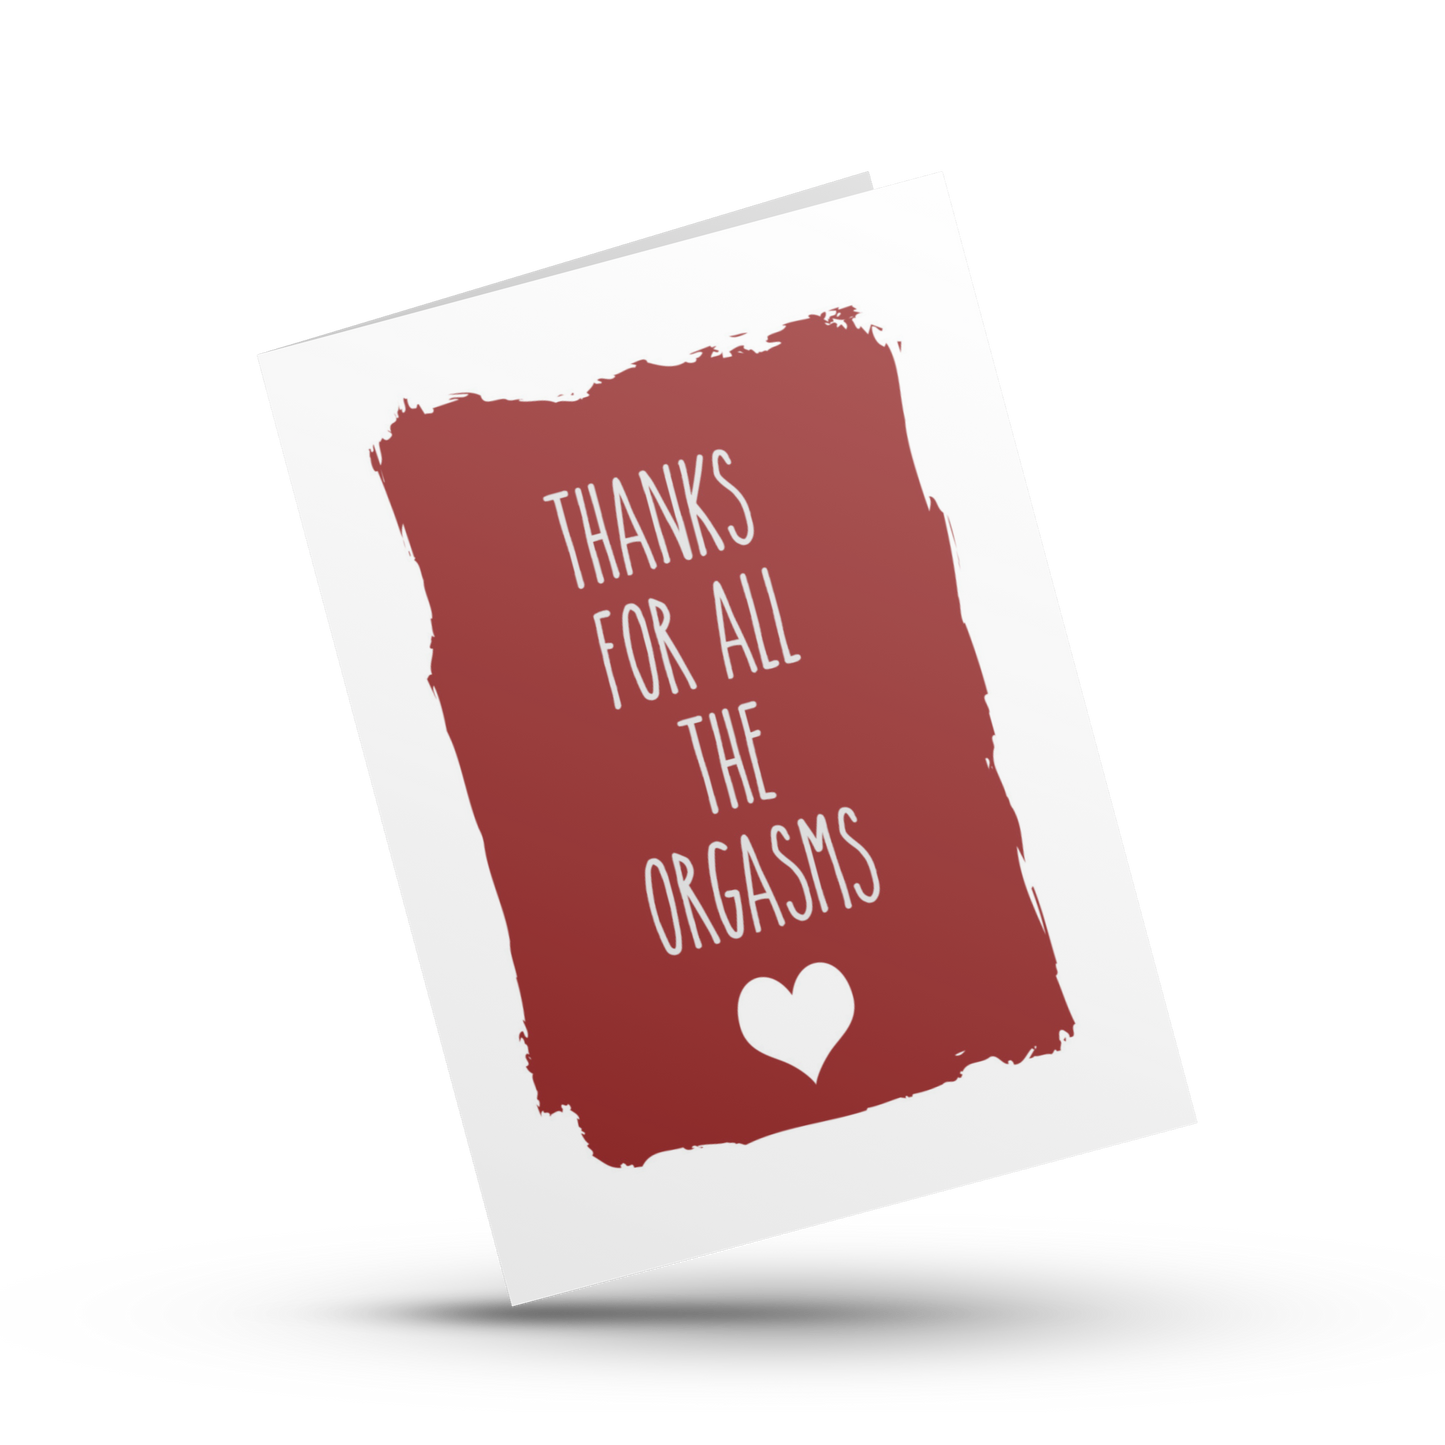 Thanks for all the orgasms, Naughty anniversary card for her, Dirty Valentine for him, Funny naughty birthday card, Dirty greeting card